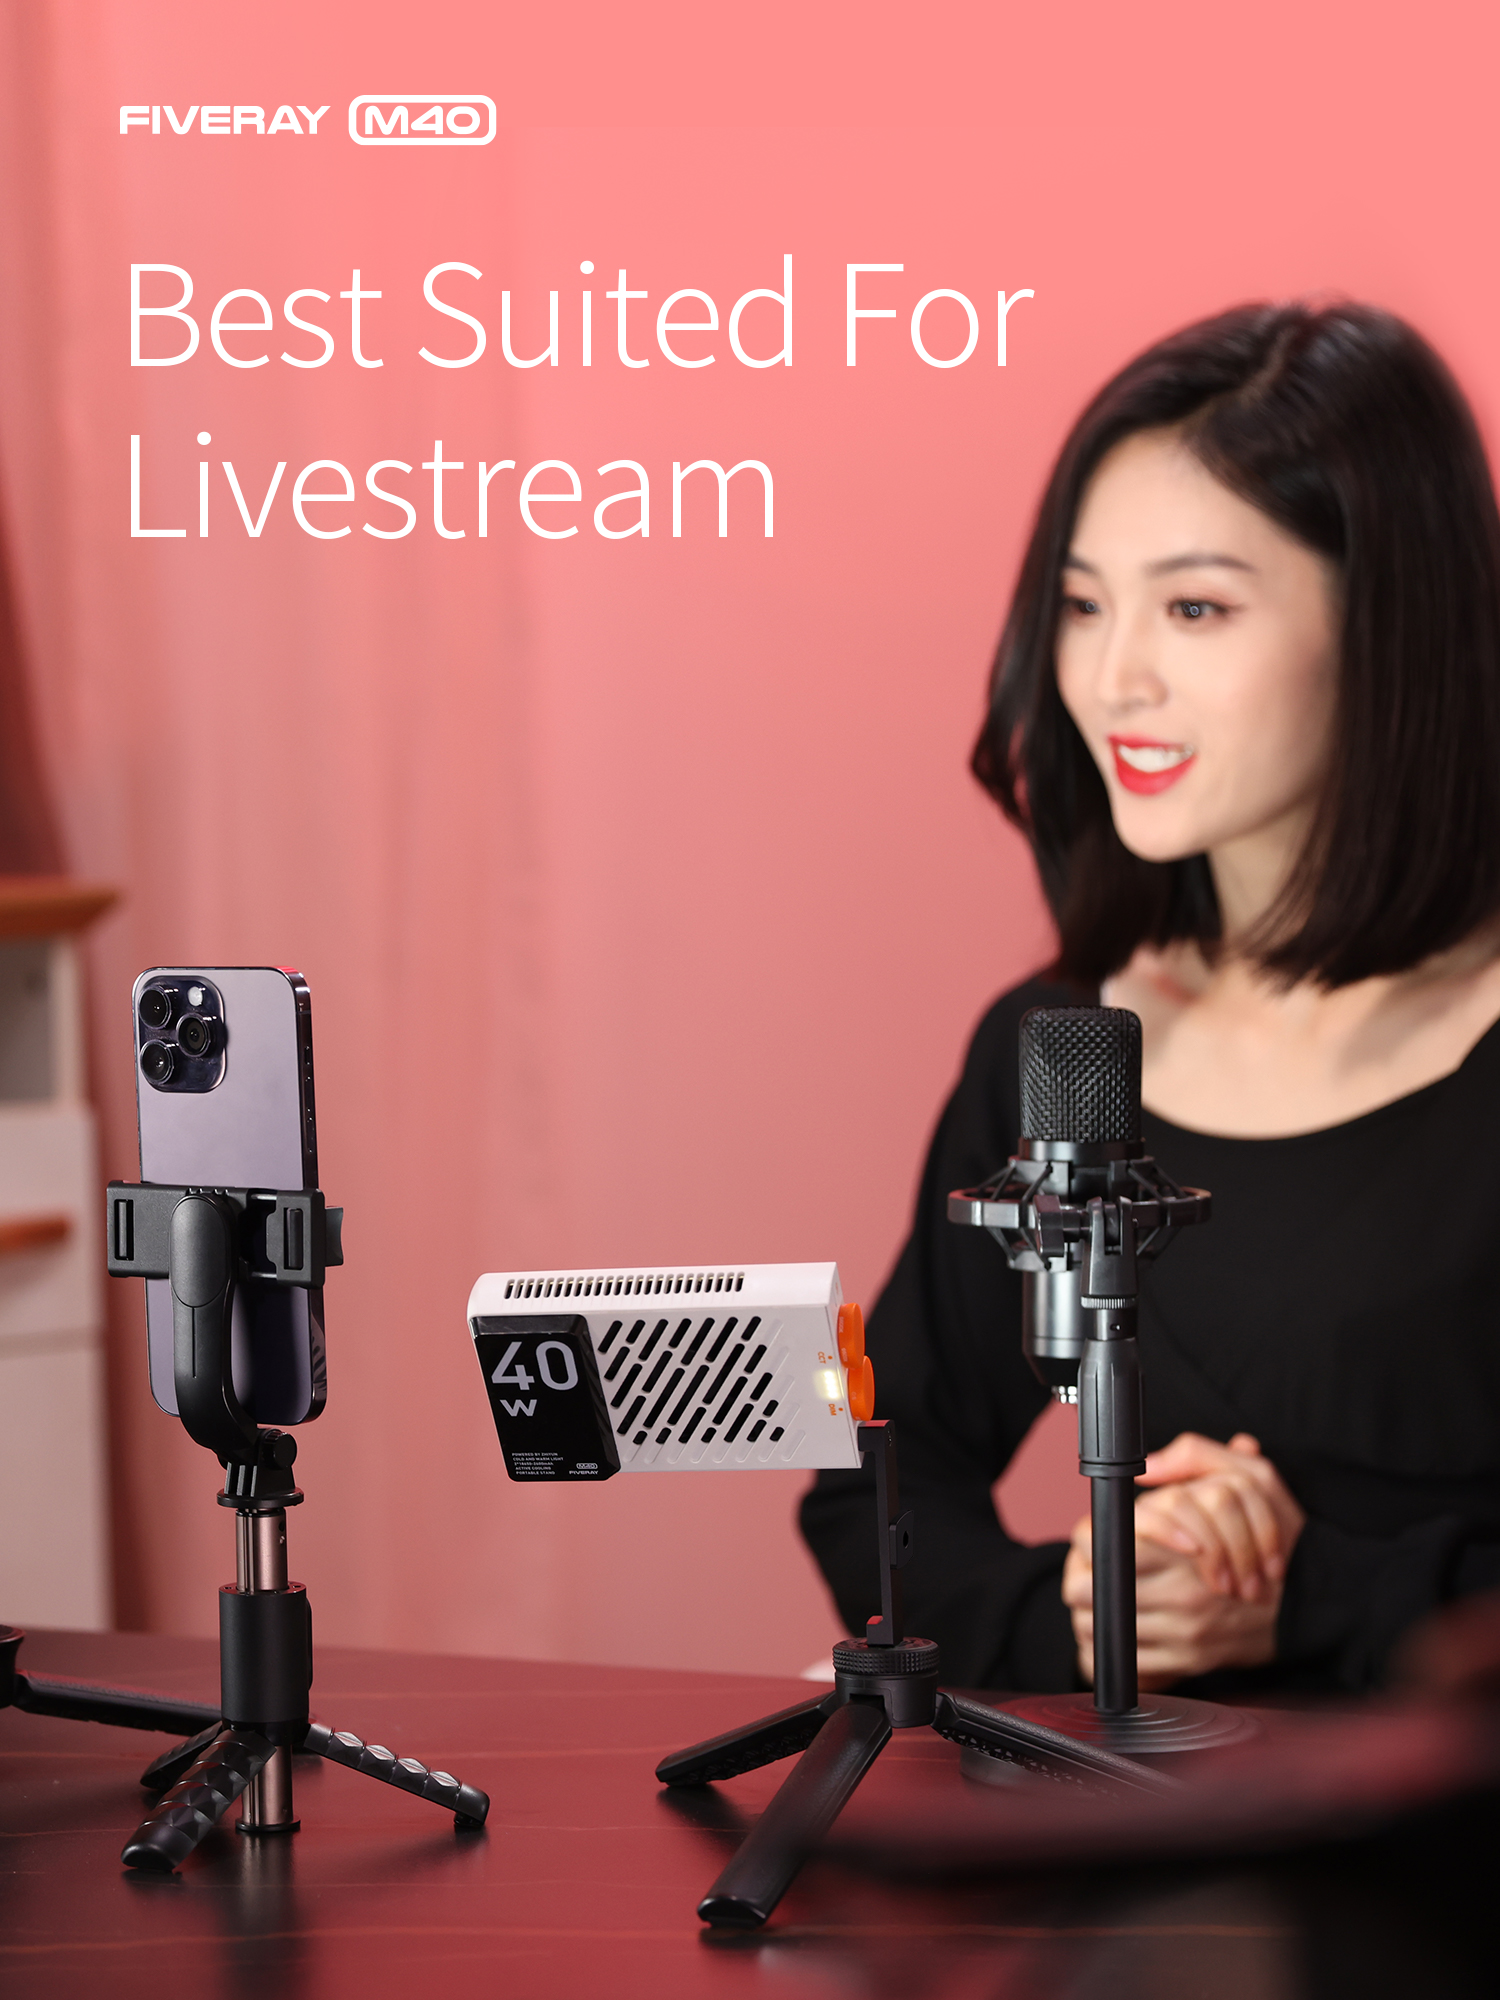 Best Suited For Livestream